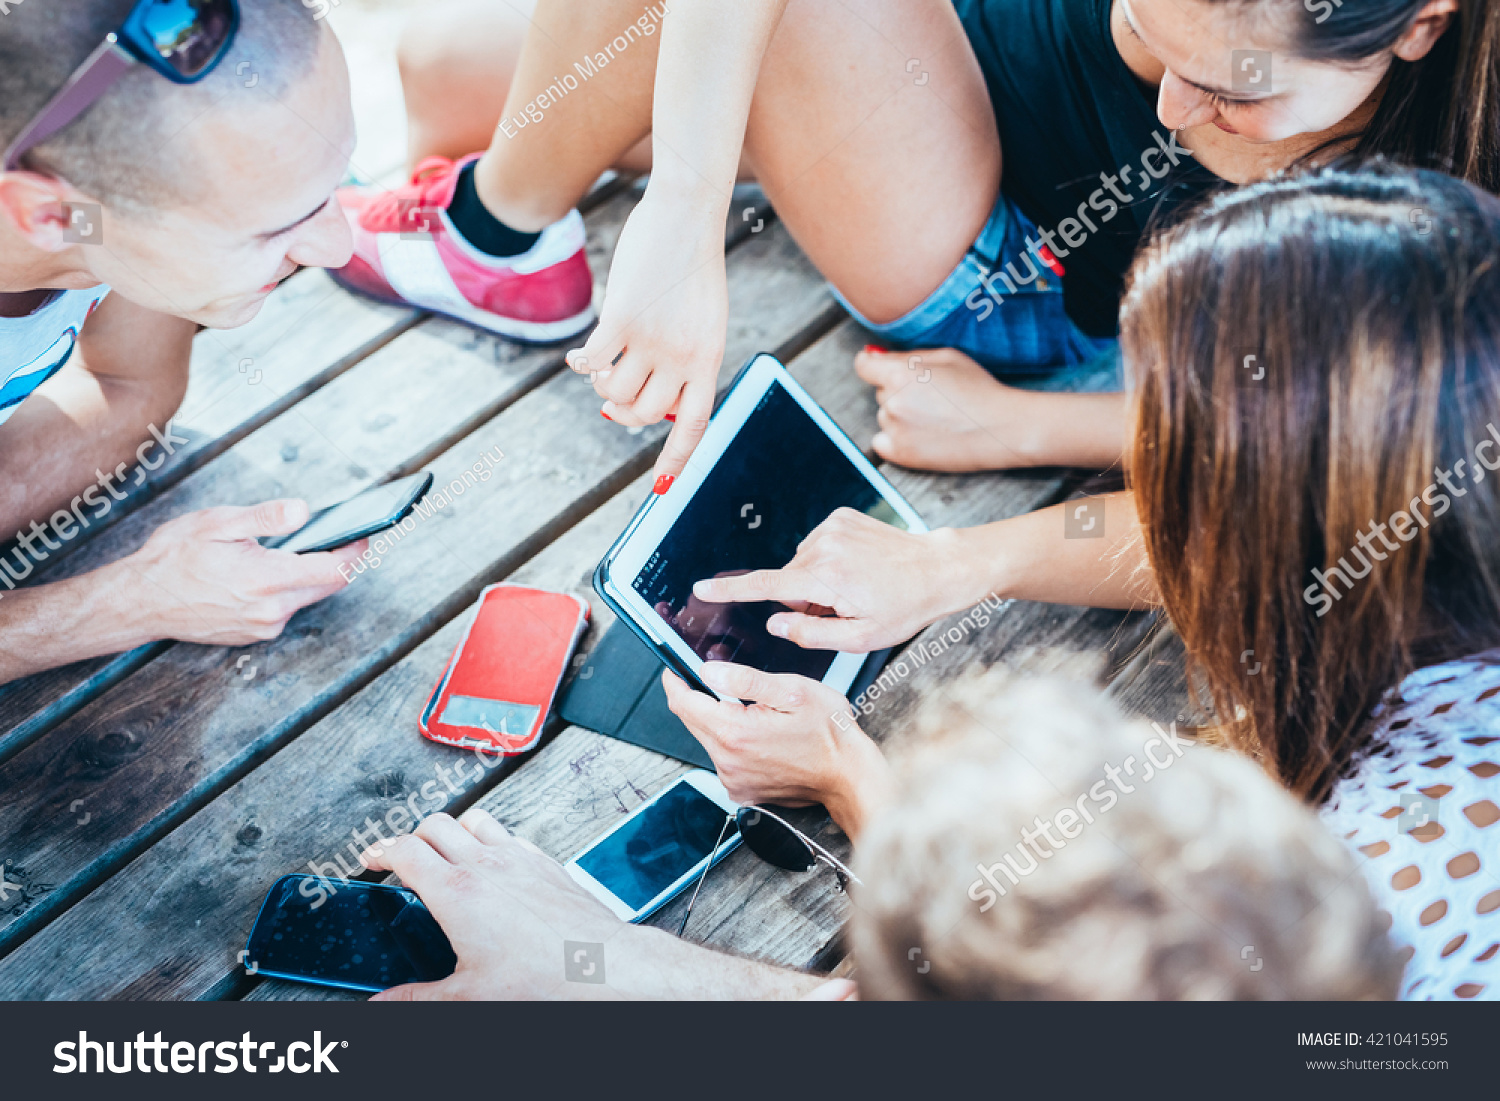 group of young multiethnic friends women and men at the beach in summertime using technological devices smart phone and tablet - social network, technology, communication concept #421041595